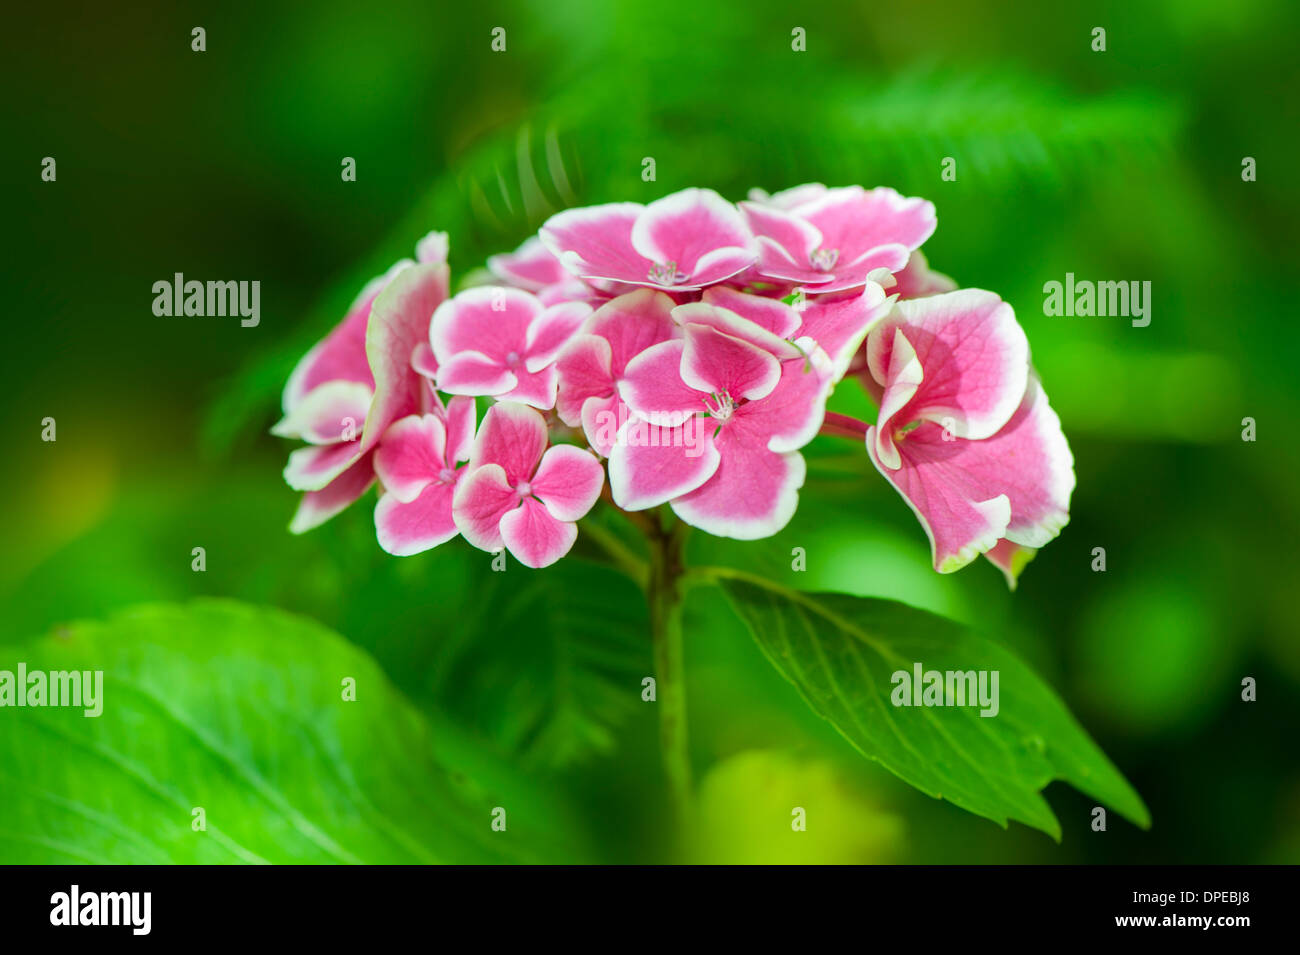 Close-up image of the beautiful summer flowering Buttons & Bows Hydrangea showing the pink flowers with delicate white edging. Stock Photo